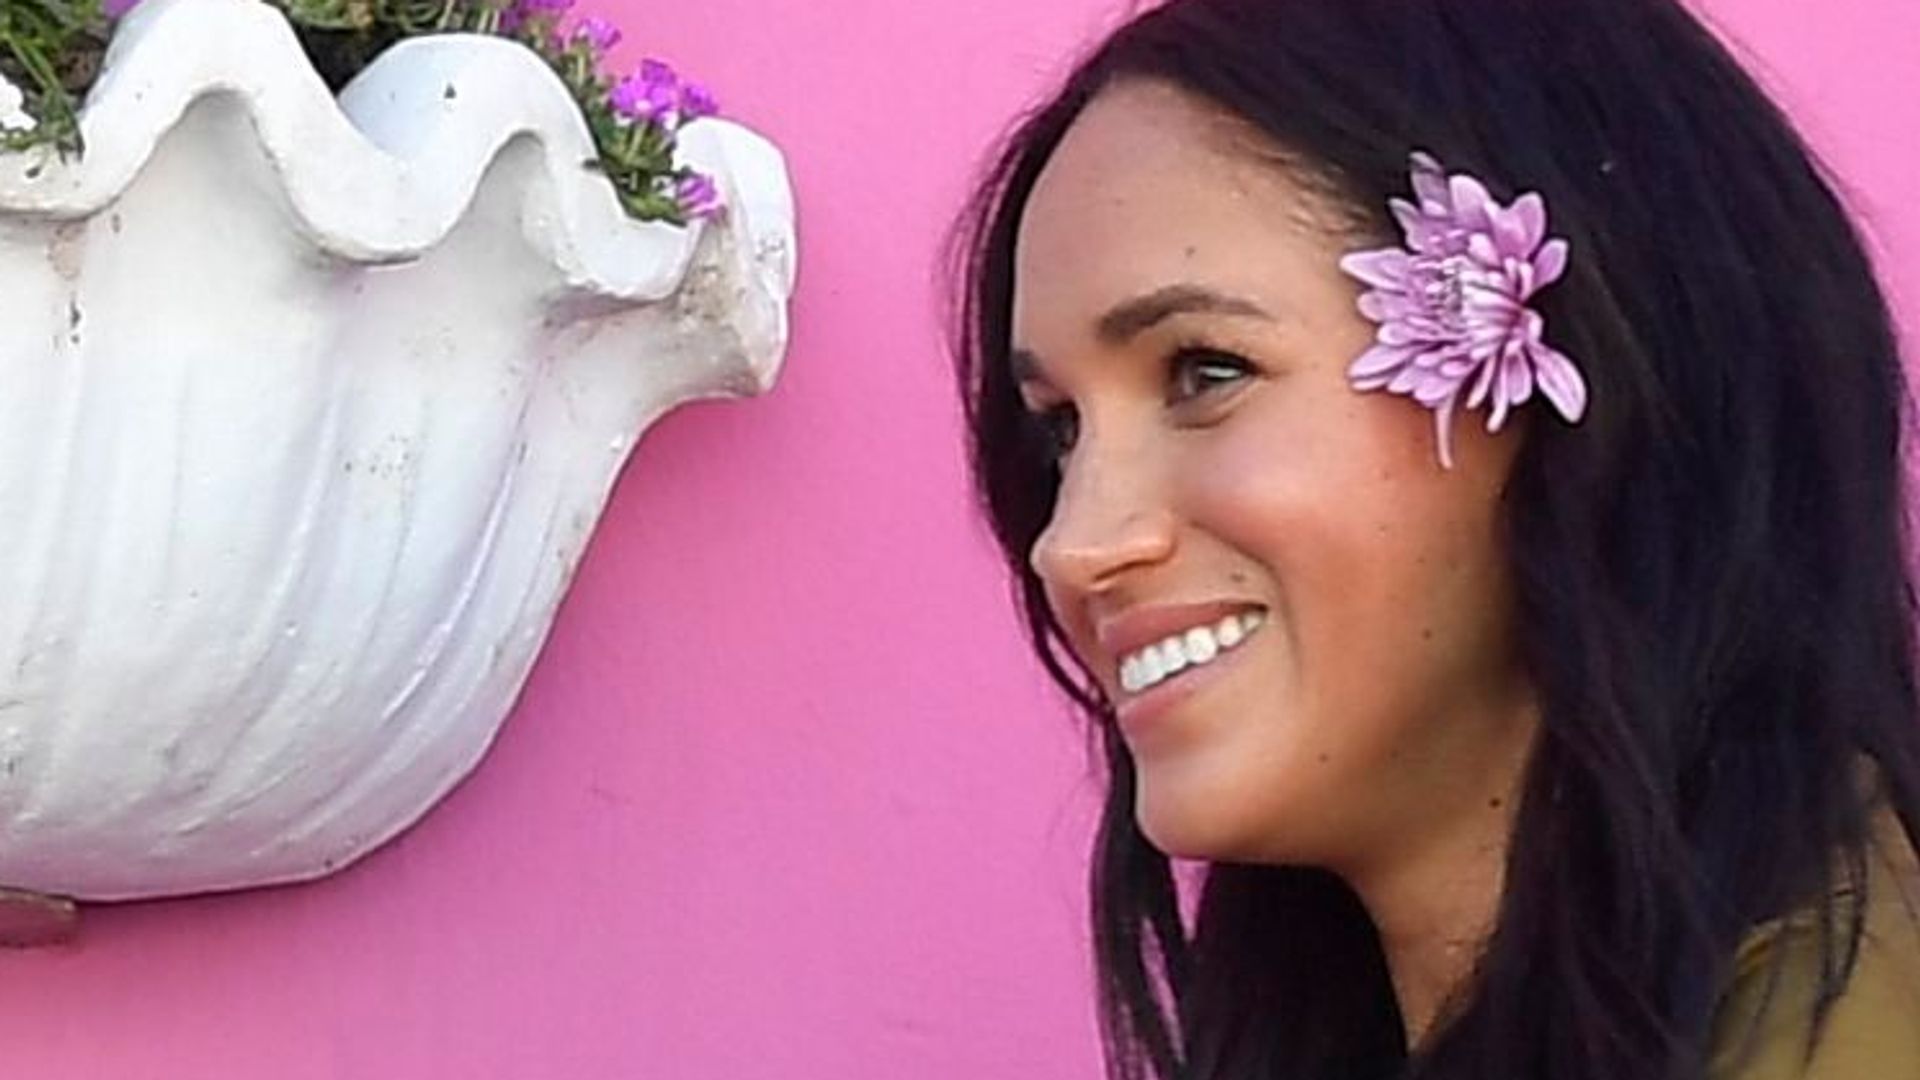 The Duchess of Sussex in front of a pink wall with a flower in her hair